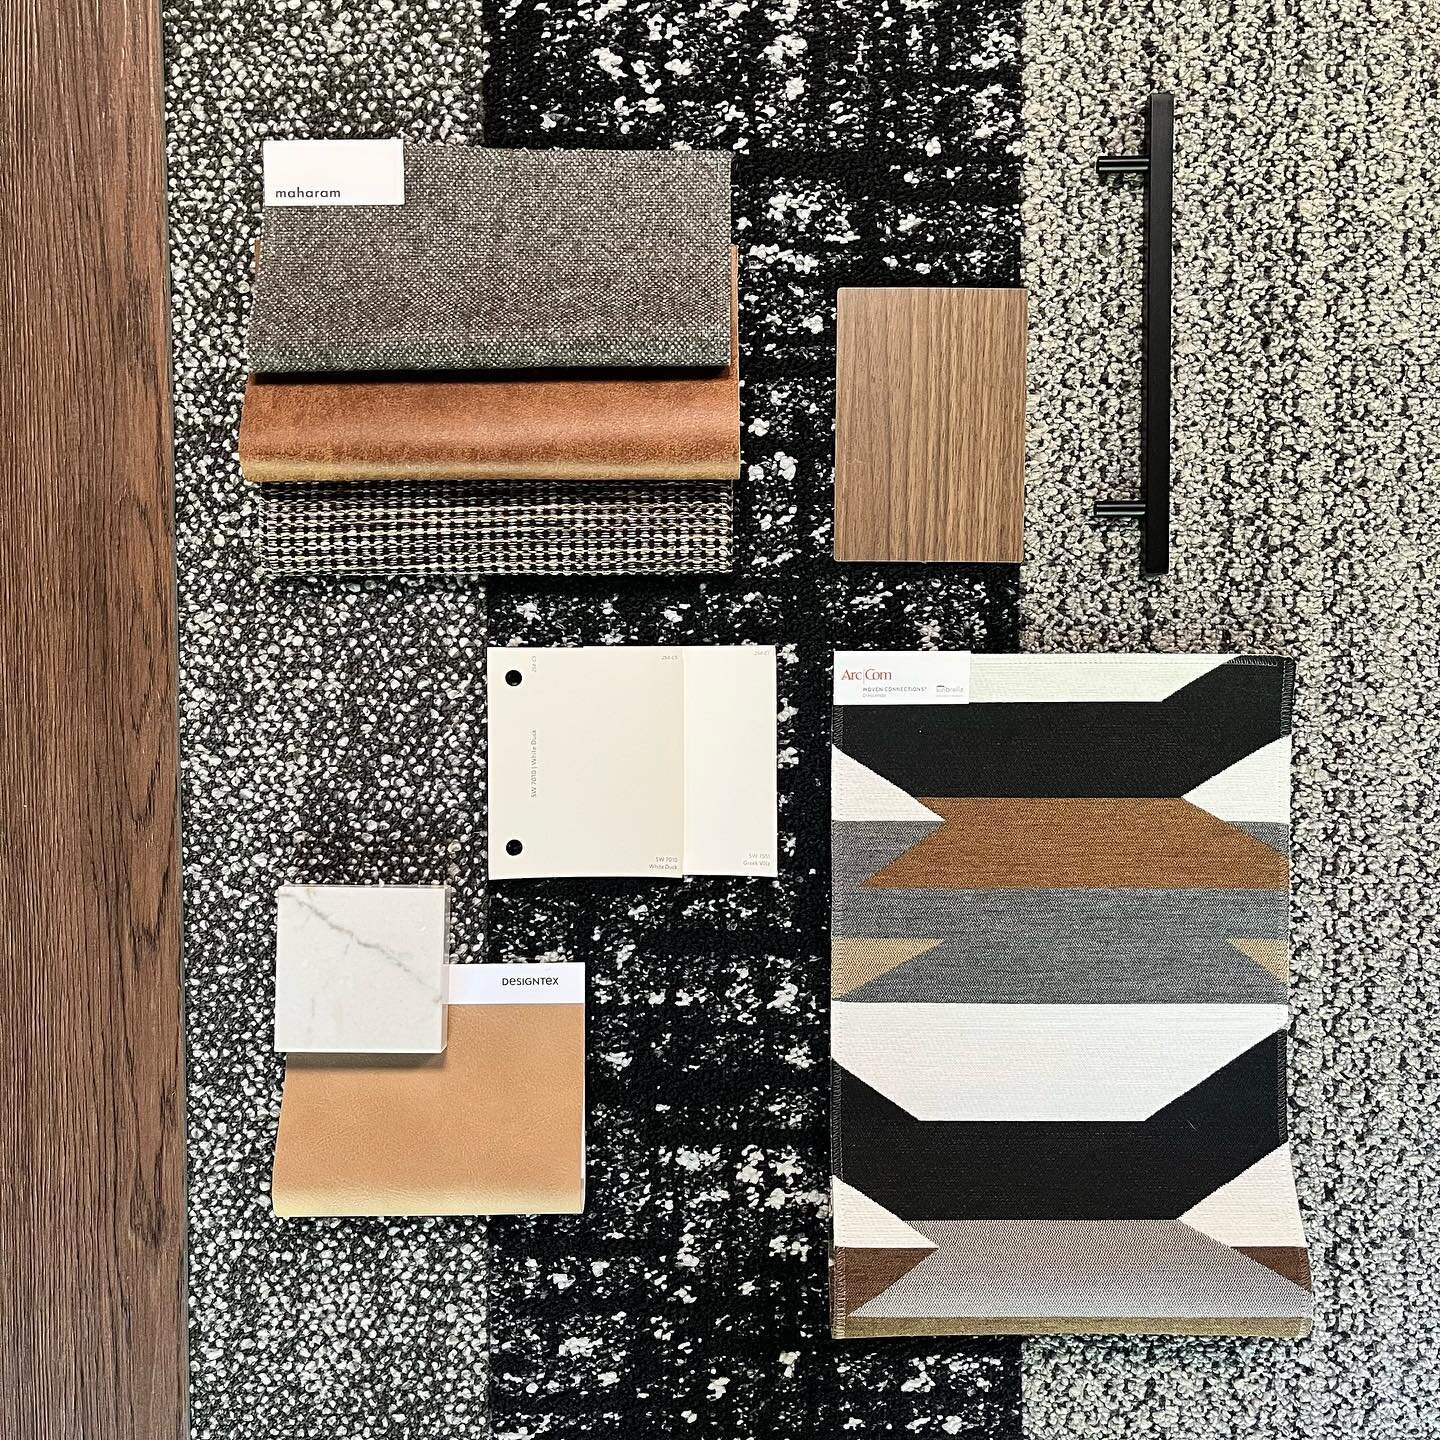 Friday + Finishes // Black, white &amp; warm neutrals for Mays Law Office renovation at 505 Maine, keeping it classic and clean with a lot of texture and natural materials. Sharing some exciting rendering visuals of this project soon!

#commercialint